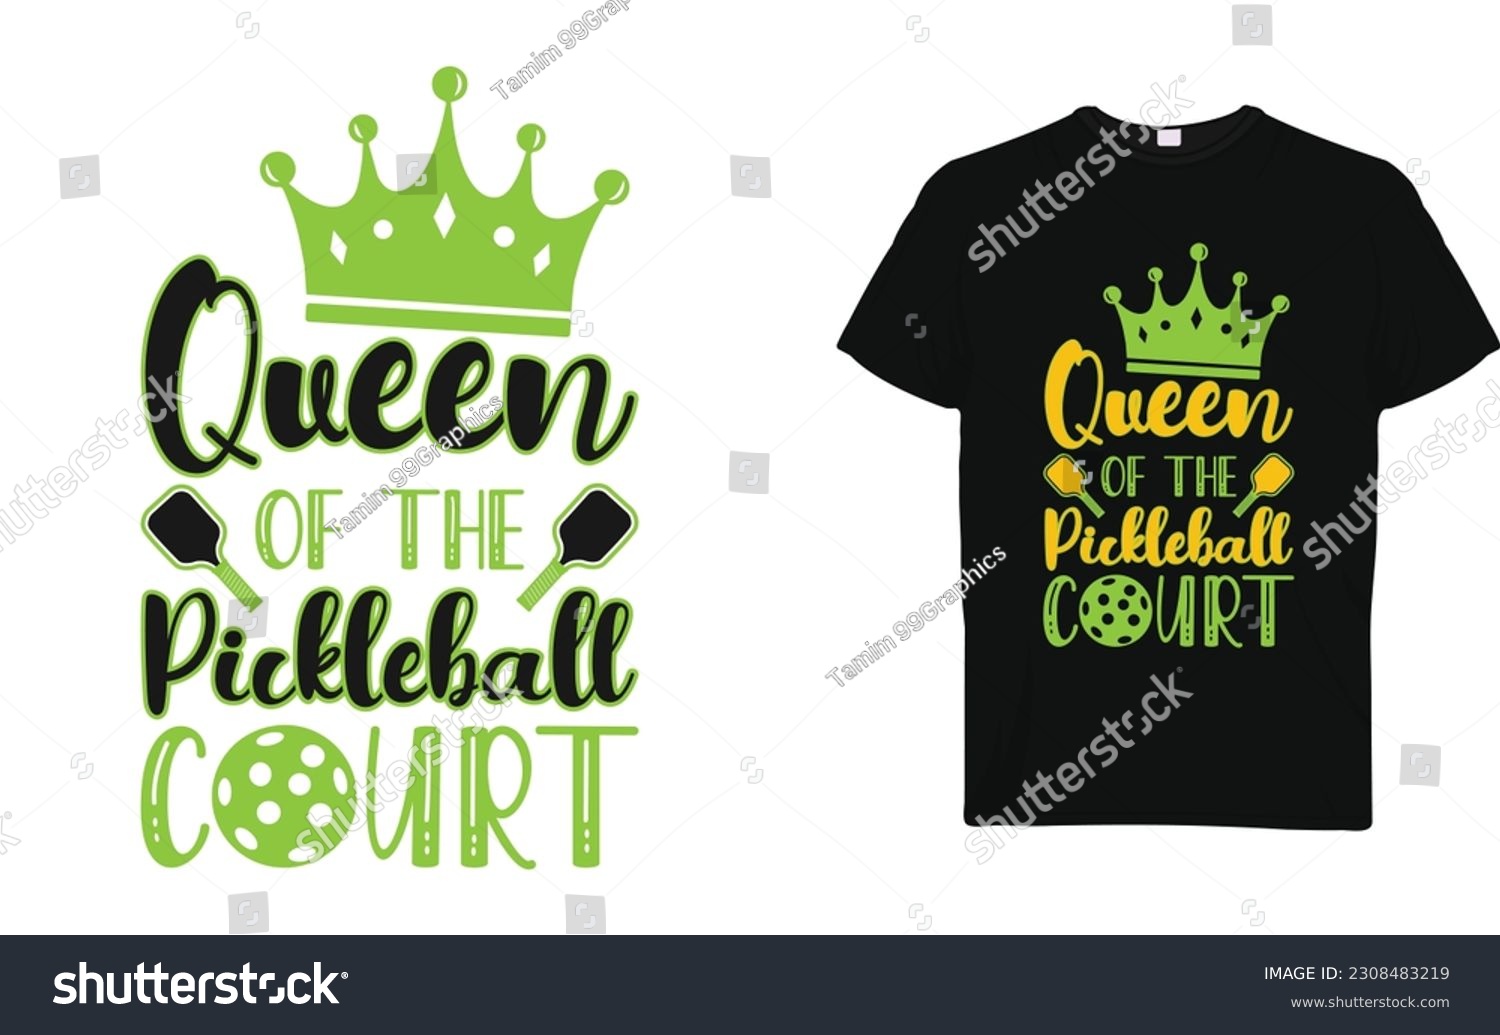 SVG of Queen of the pickleball court t shirt design. Pickleball SVG design. 
Queen of the pickle ball court SVG t shirt design on white background. svg